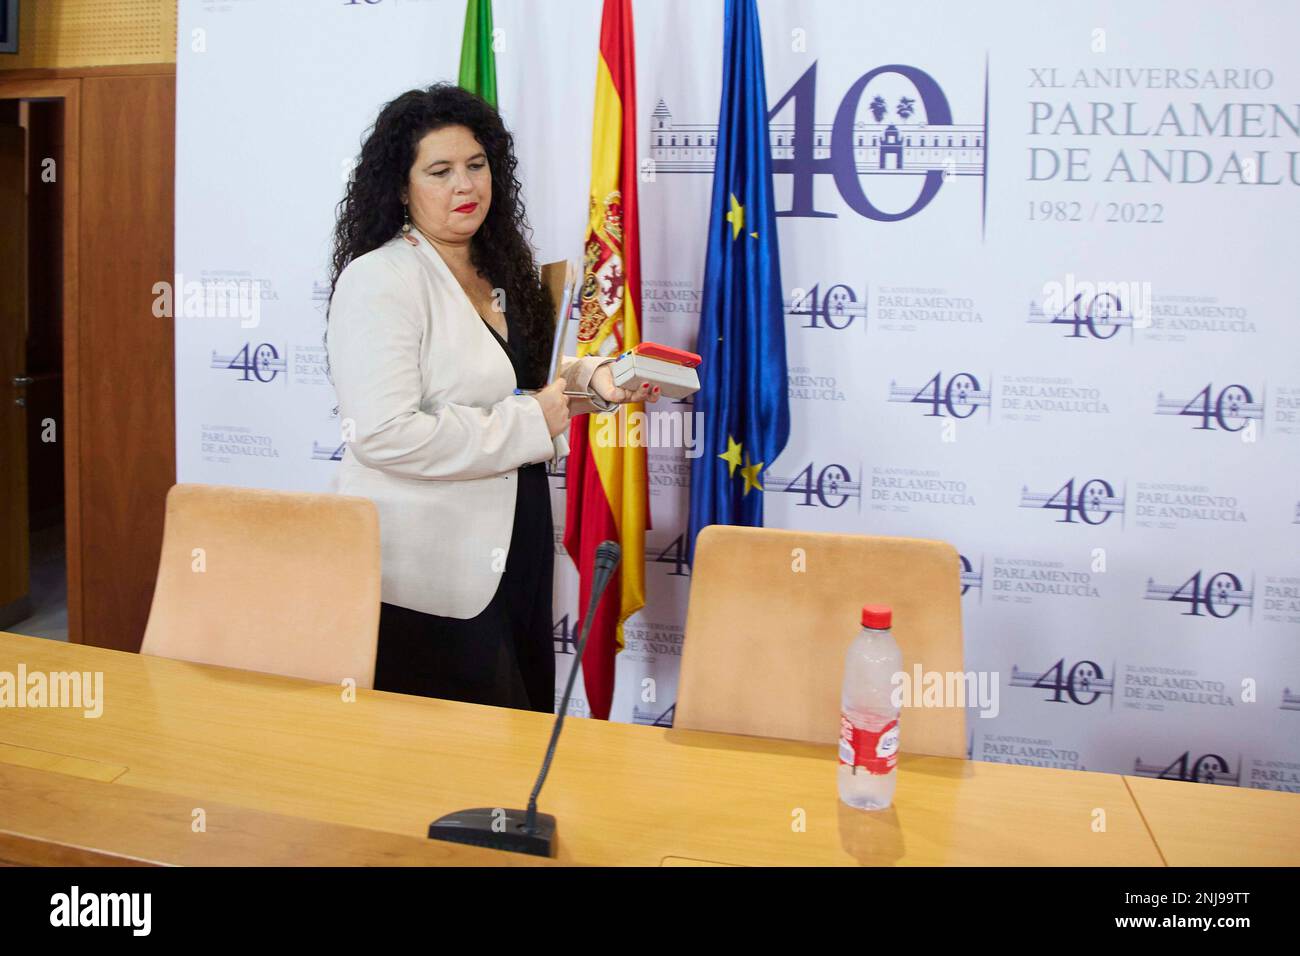 The president of the Mixed Group-AdelanteAndalucía, María Isabel Mora,  during the round of press conferences of spokespersons of the parliamentary  groups on the occasion of the meeting of the Bureau and the